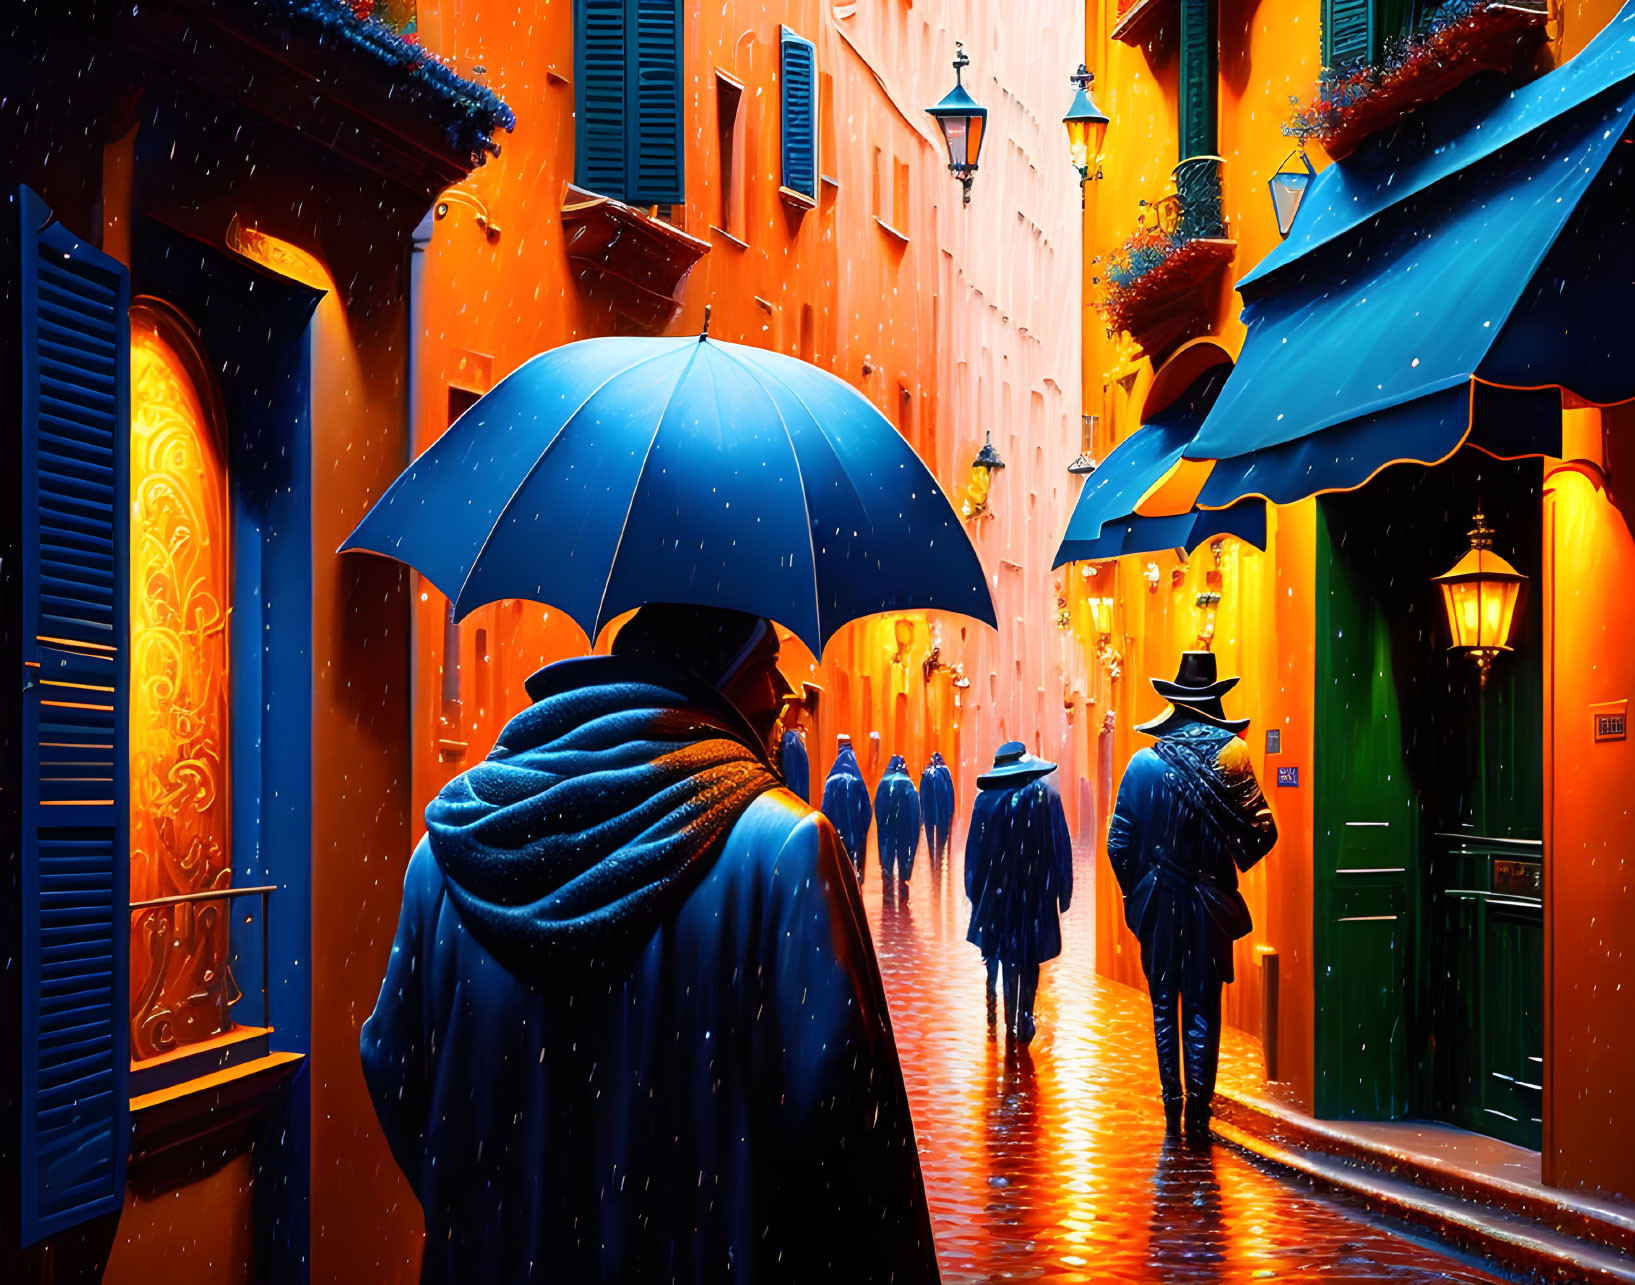 Colorful Rainy Day Street Scene with People and Umbrellas